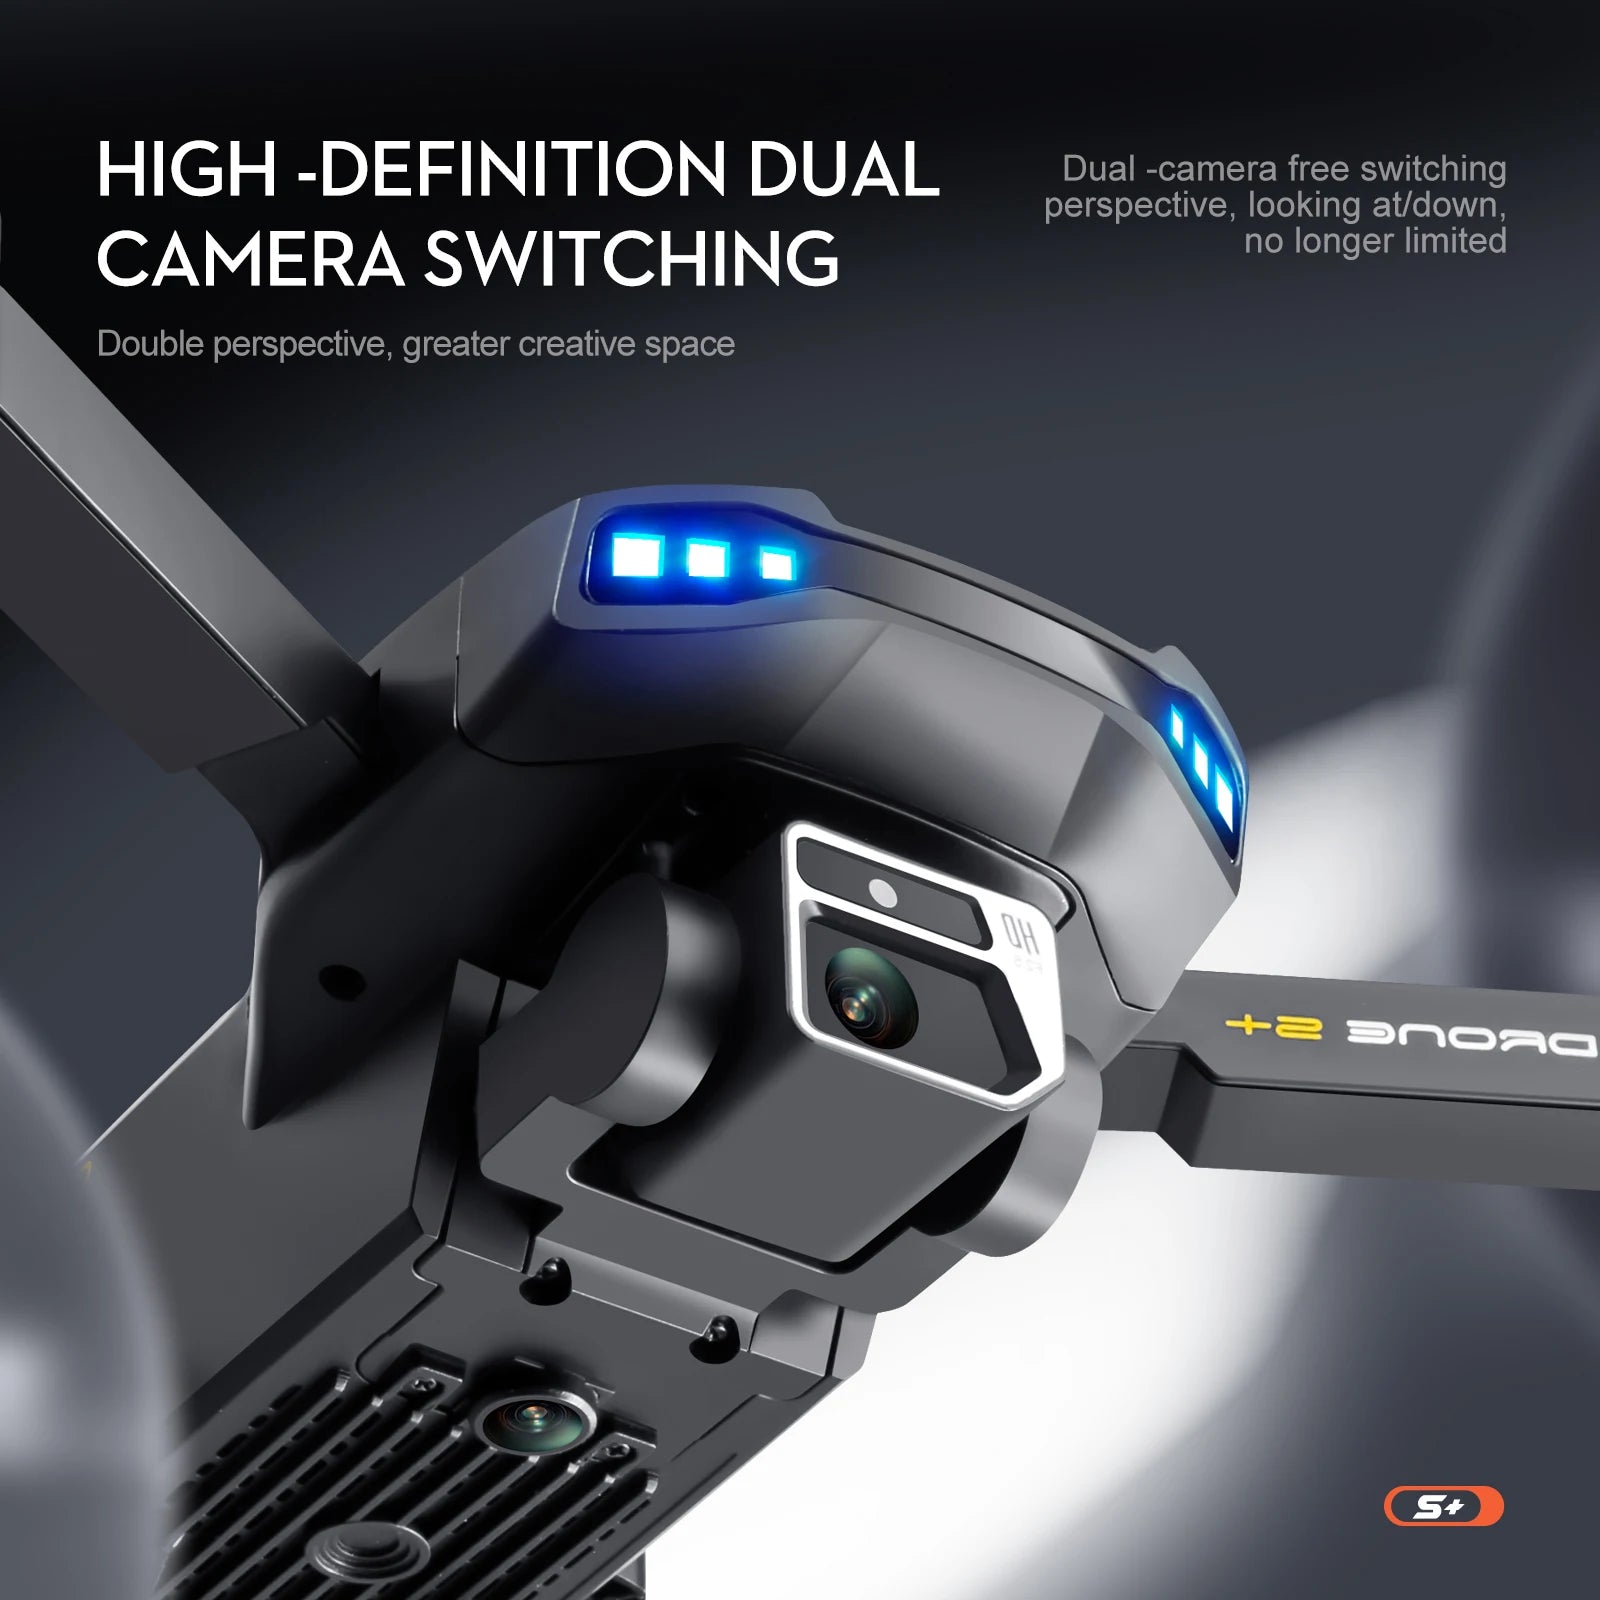 S+ Drone, HIGH -DEFINITION DUAL Dual -camera free switching perspective, looking